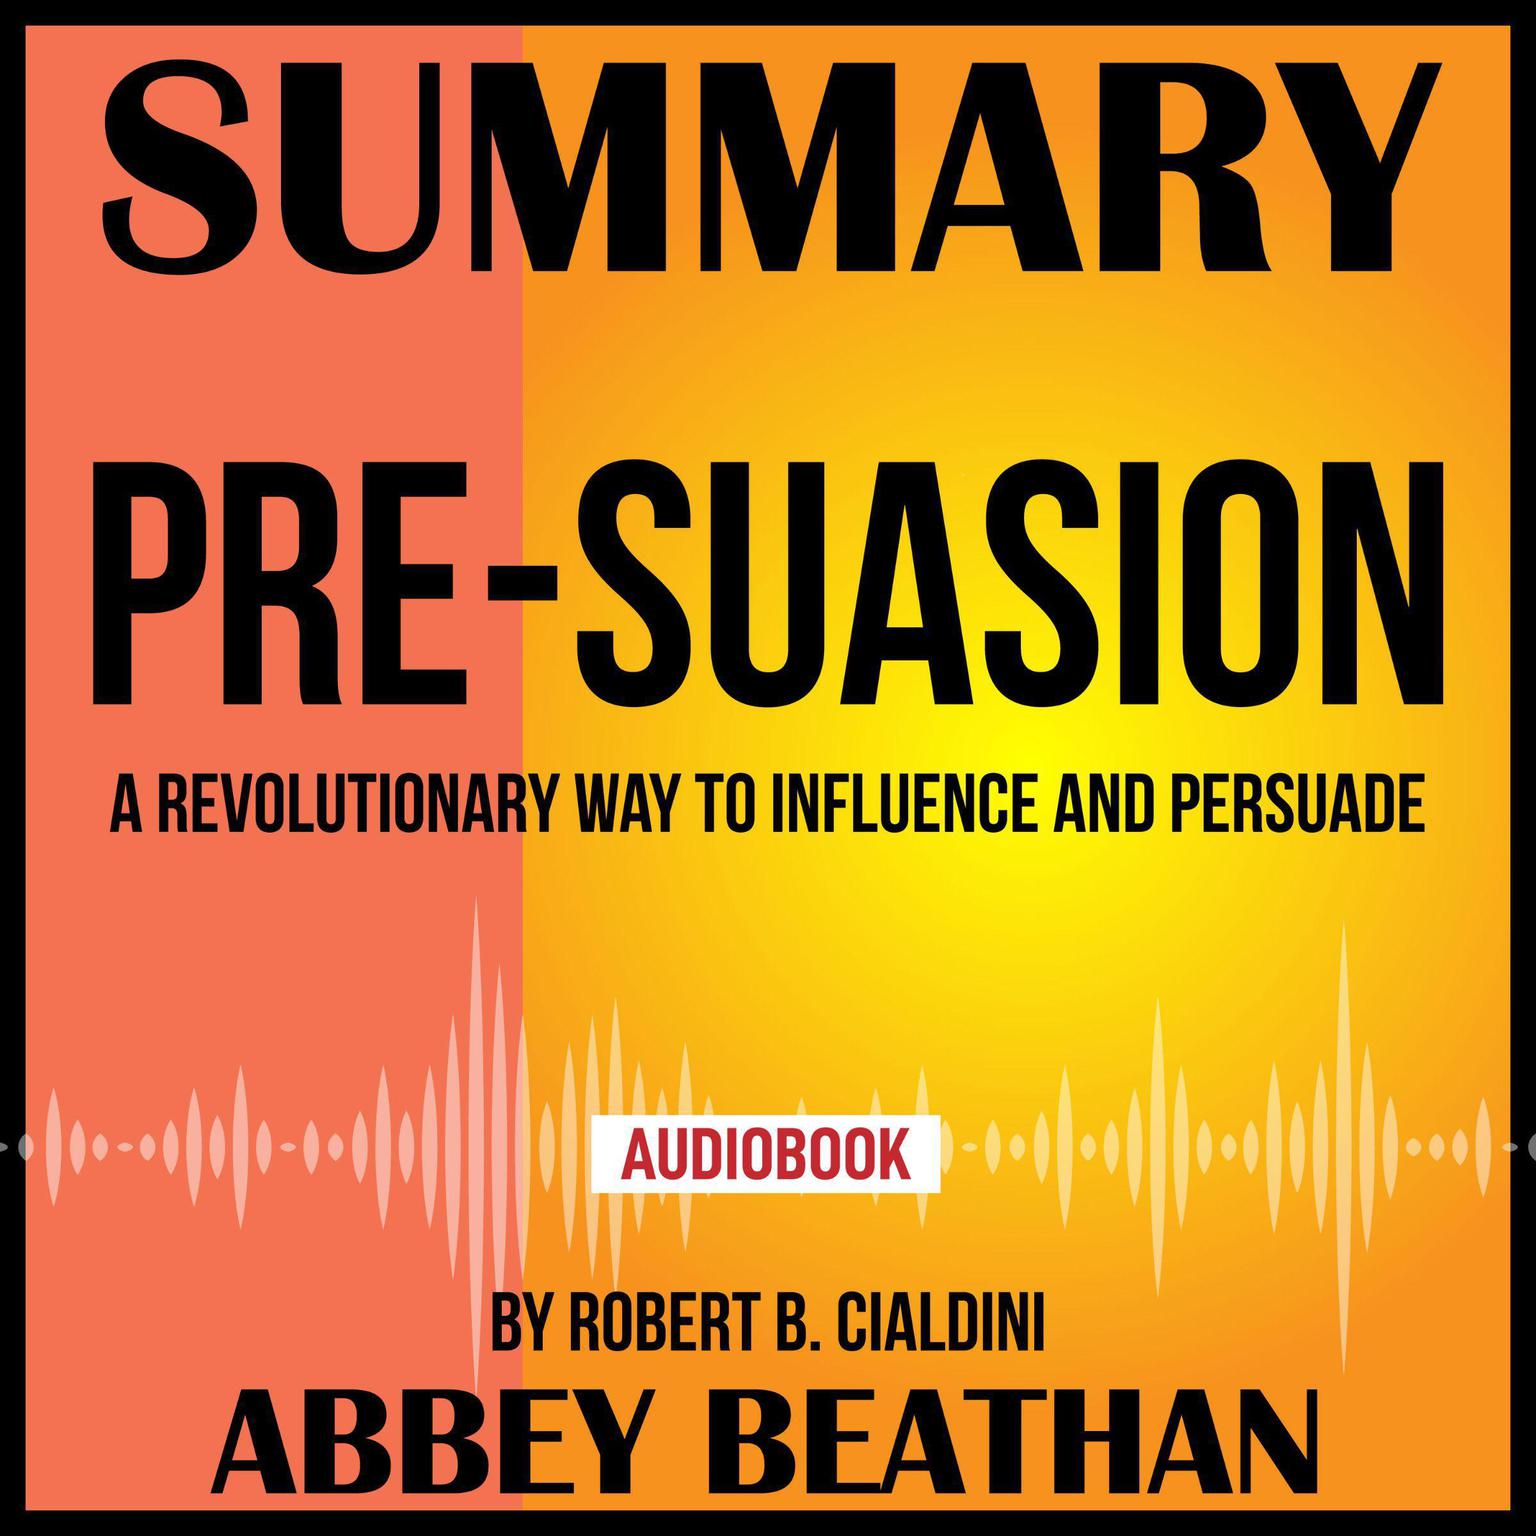 Summary of Pre-Suasion: A Revolutionary Way to Influence and Persuade by Robert B. Cialdini Audiobook, by Abbey Beathan